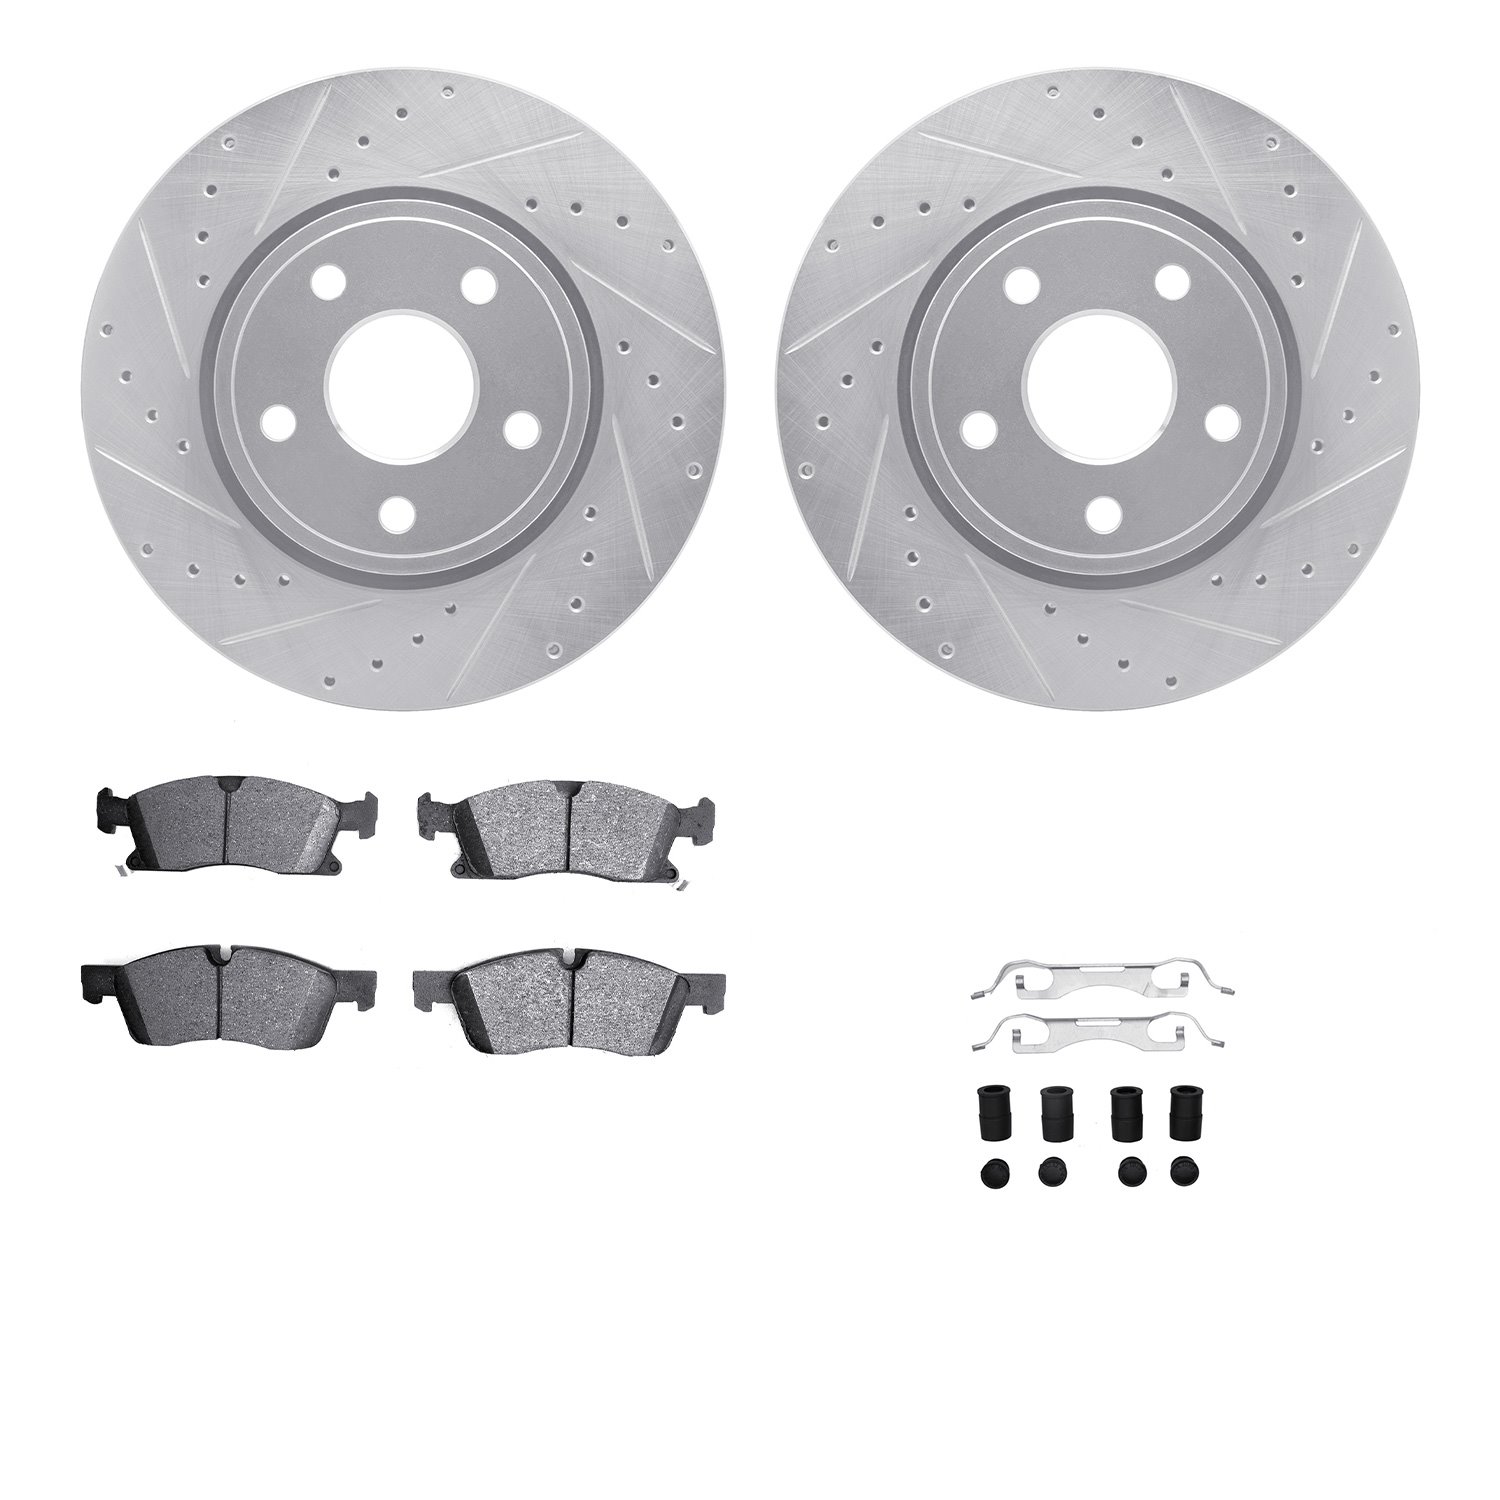 7412-42006 Drilled/Slotted Brake Rotors with Ultimate-Duty Brake Pads Kit & Hardware [Silver], Fits Select Mopar, Position: Fron